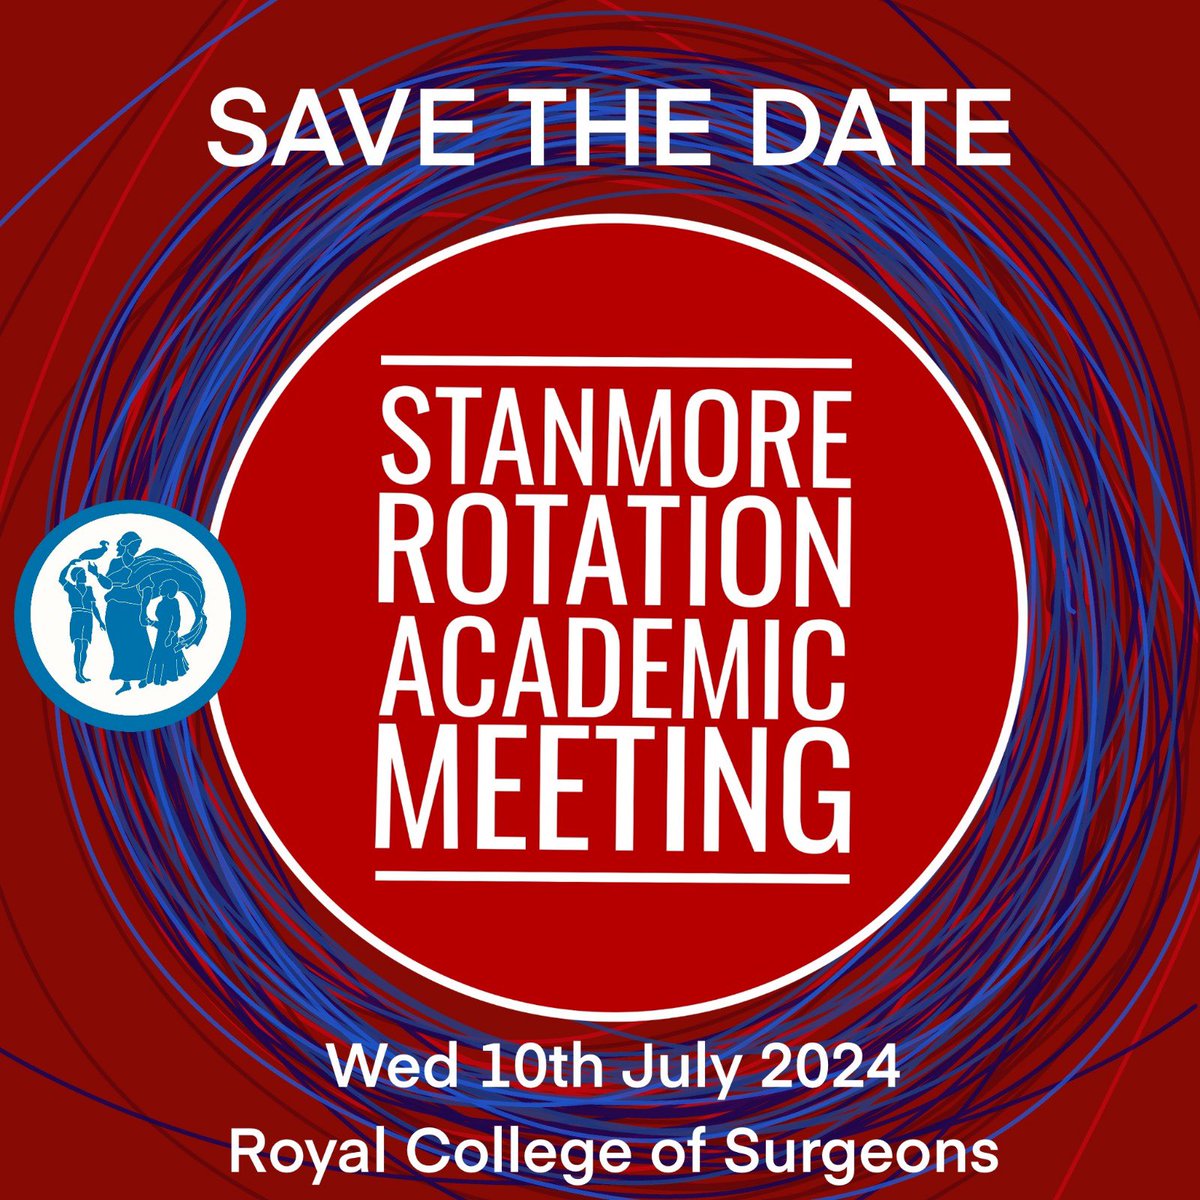 🚨Save the Date🚨 Stanmore Rotation Academic Meeting 2024 featuring a host of exciting speakers, sponsors & the excellent work of our trainees from the past year! 🛠️ More details to follow! 🛠️ #SRAM2024 #orthotwitter #research #collaboration #excellence #stanmoreorthopaedics